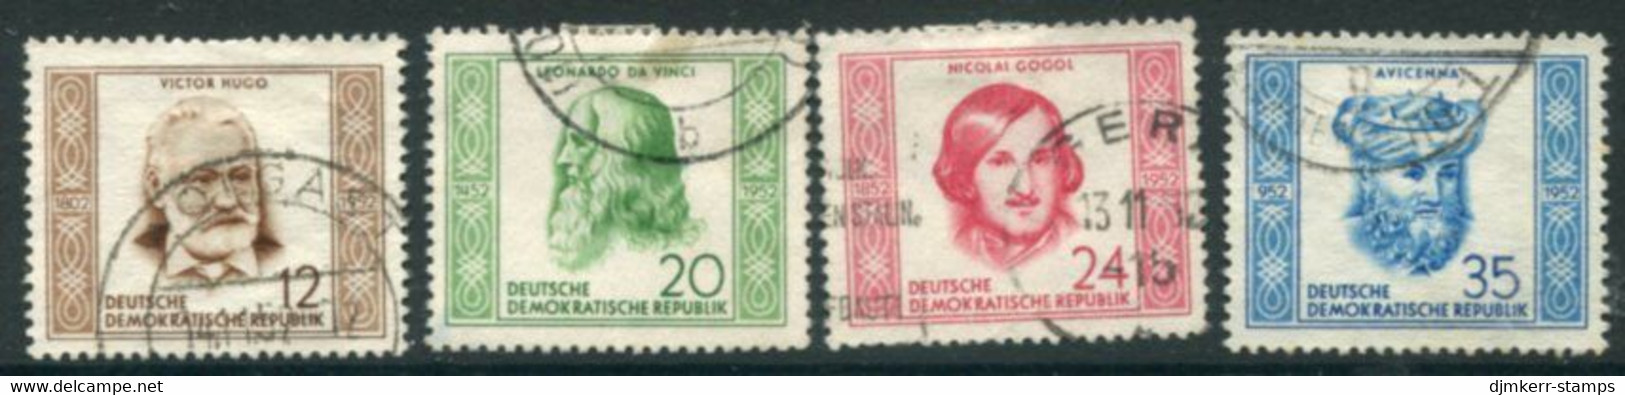 DDR / E. GERMANY 1952 Personalitiess Used.  Michel  311-14 - Used Stamps